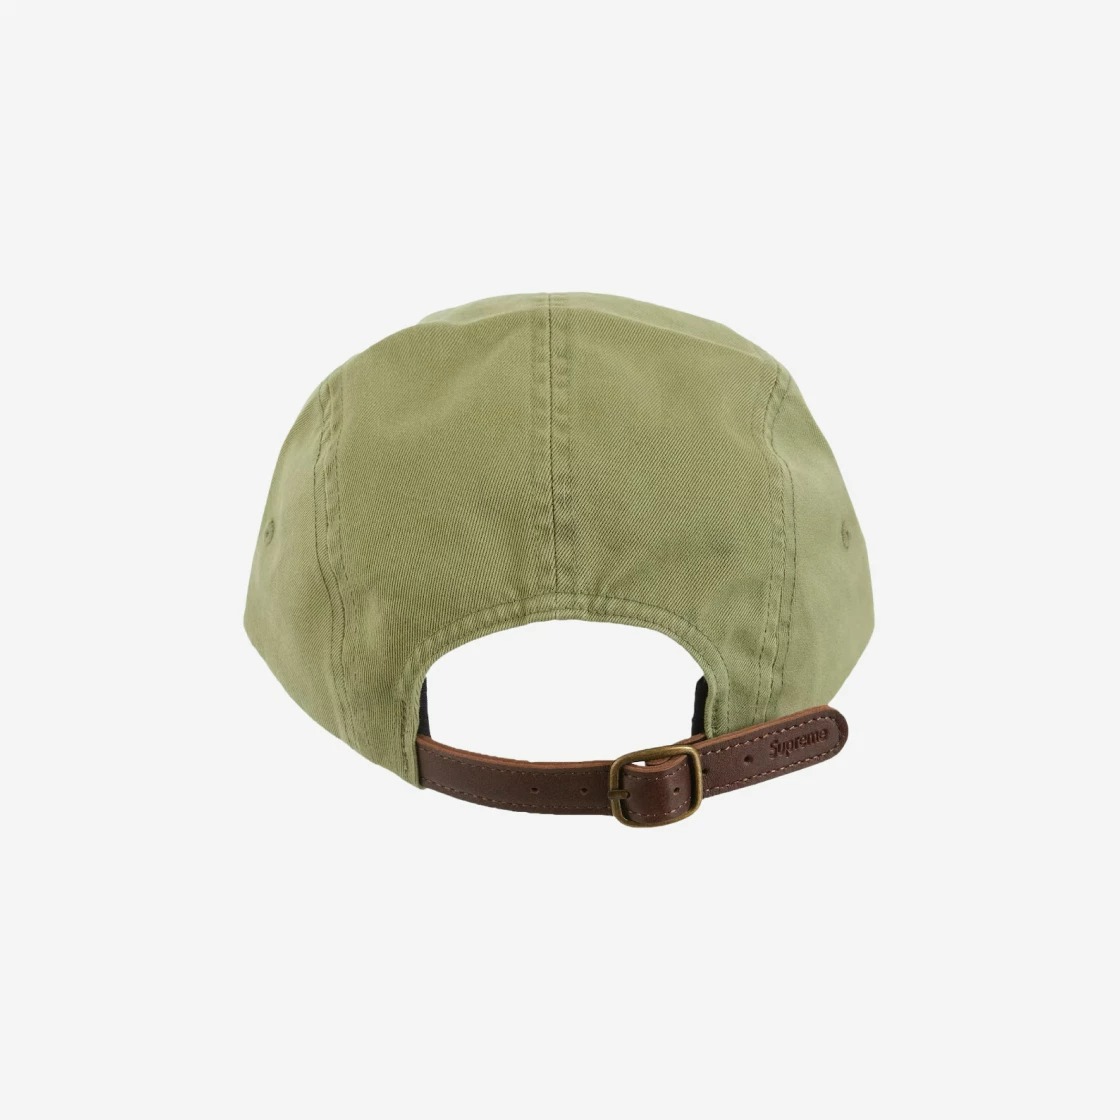 Supreme Washed Chino Twill Camp Cap Olive